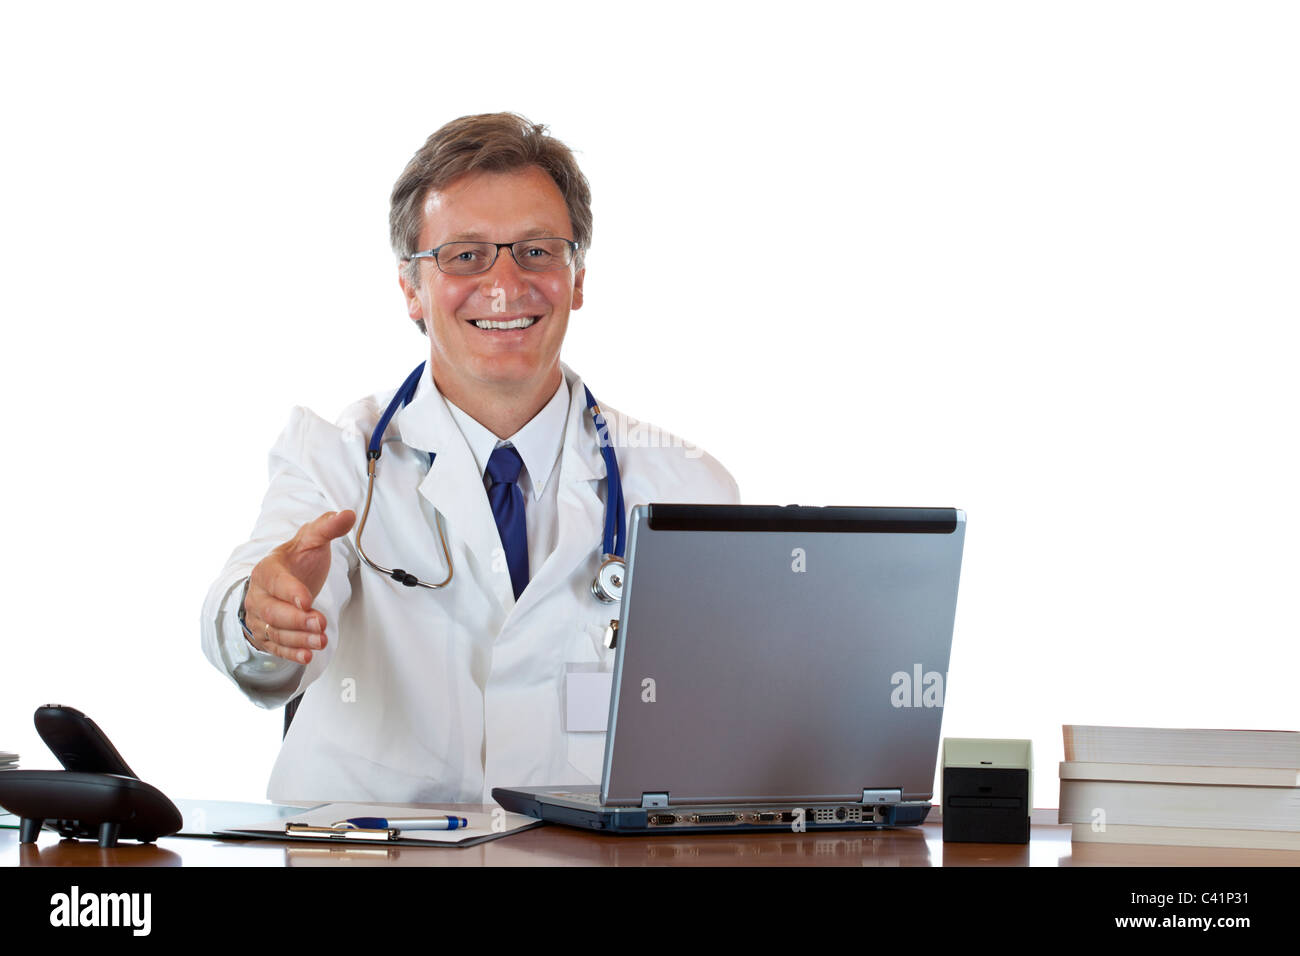 Friendly male doctor sitting in office offering hand for handshake. isolated on white background. Stock Photo